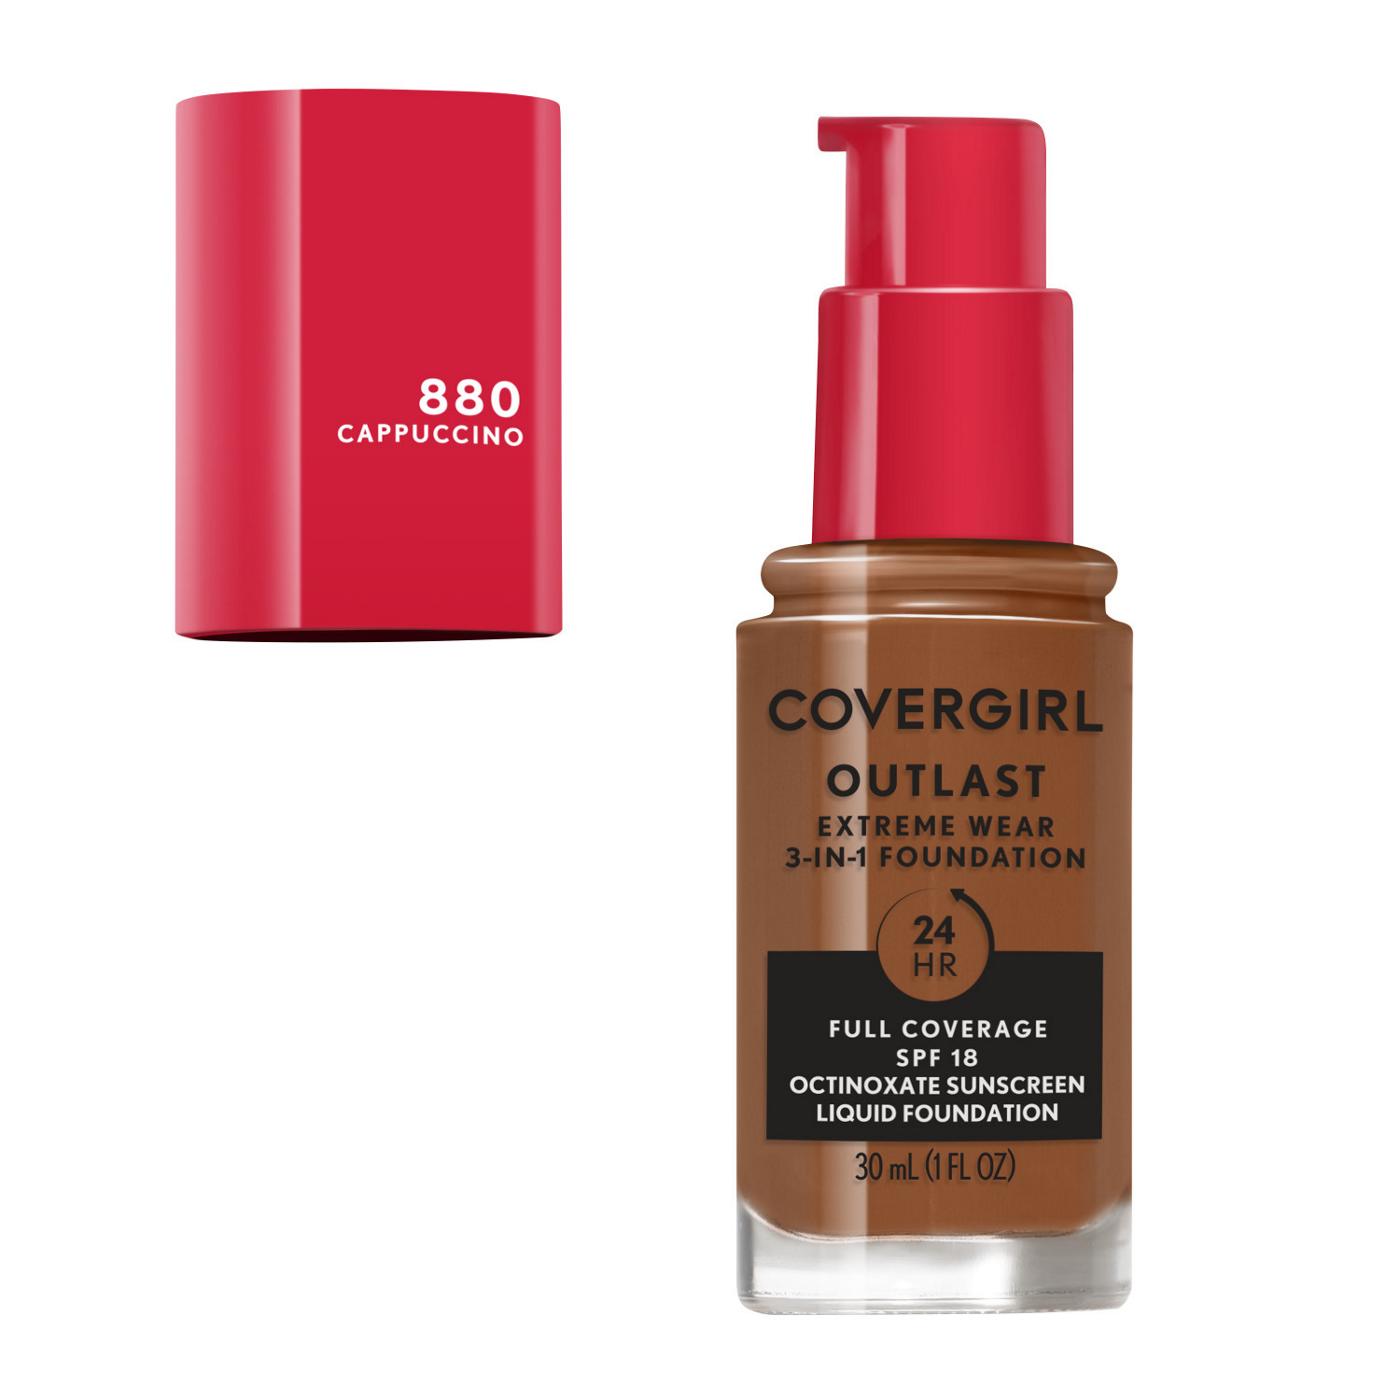 Covergirl Outlast Extreme Wear Liquid Foundation 880 Cappuccino; image 3 of 11